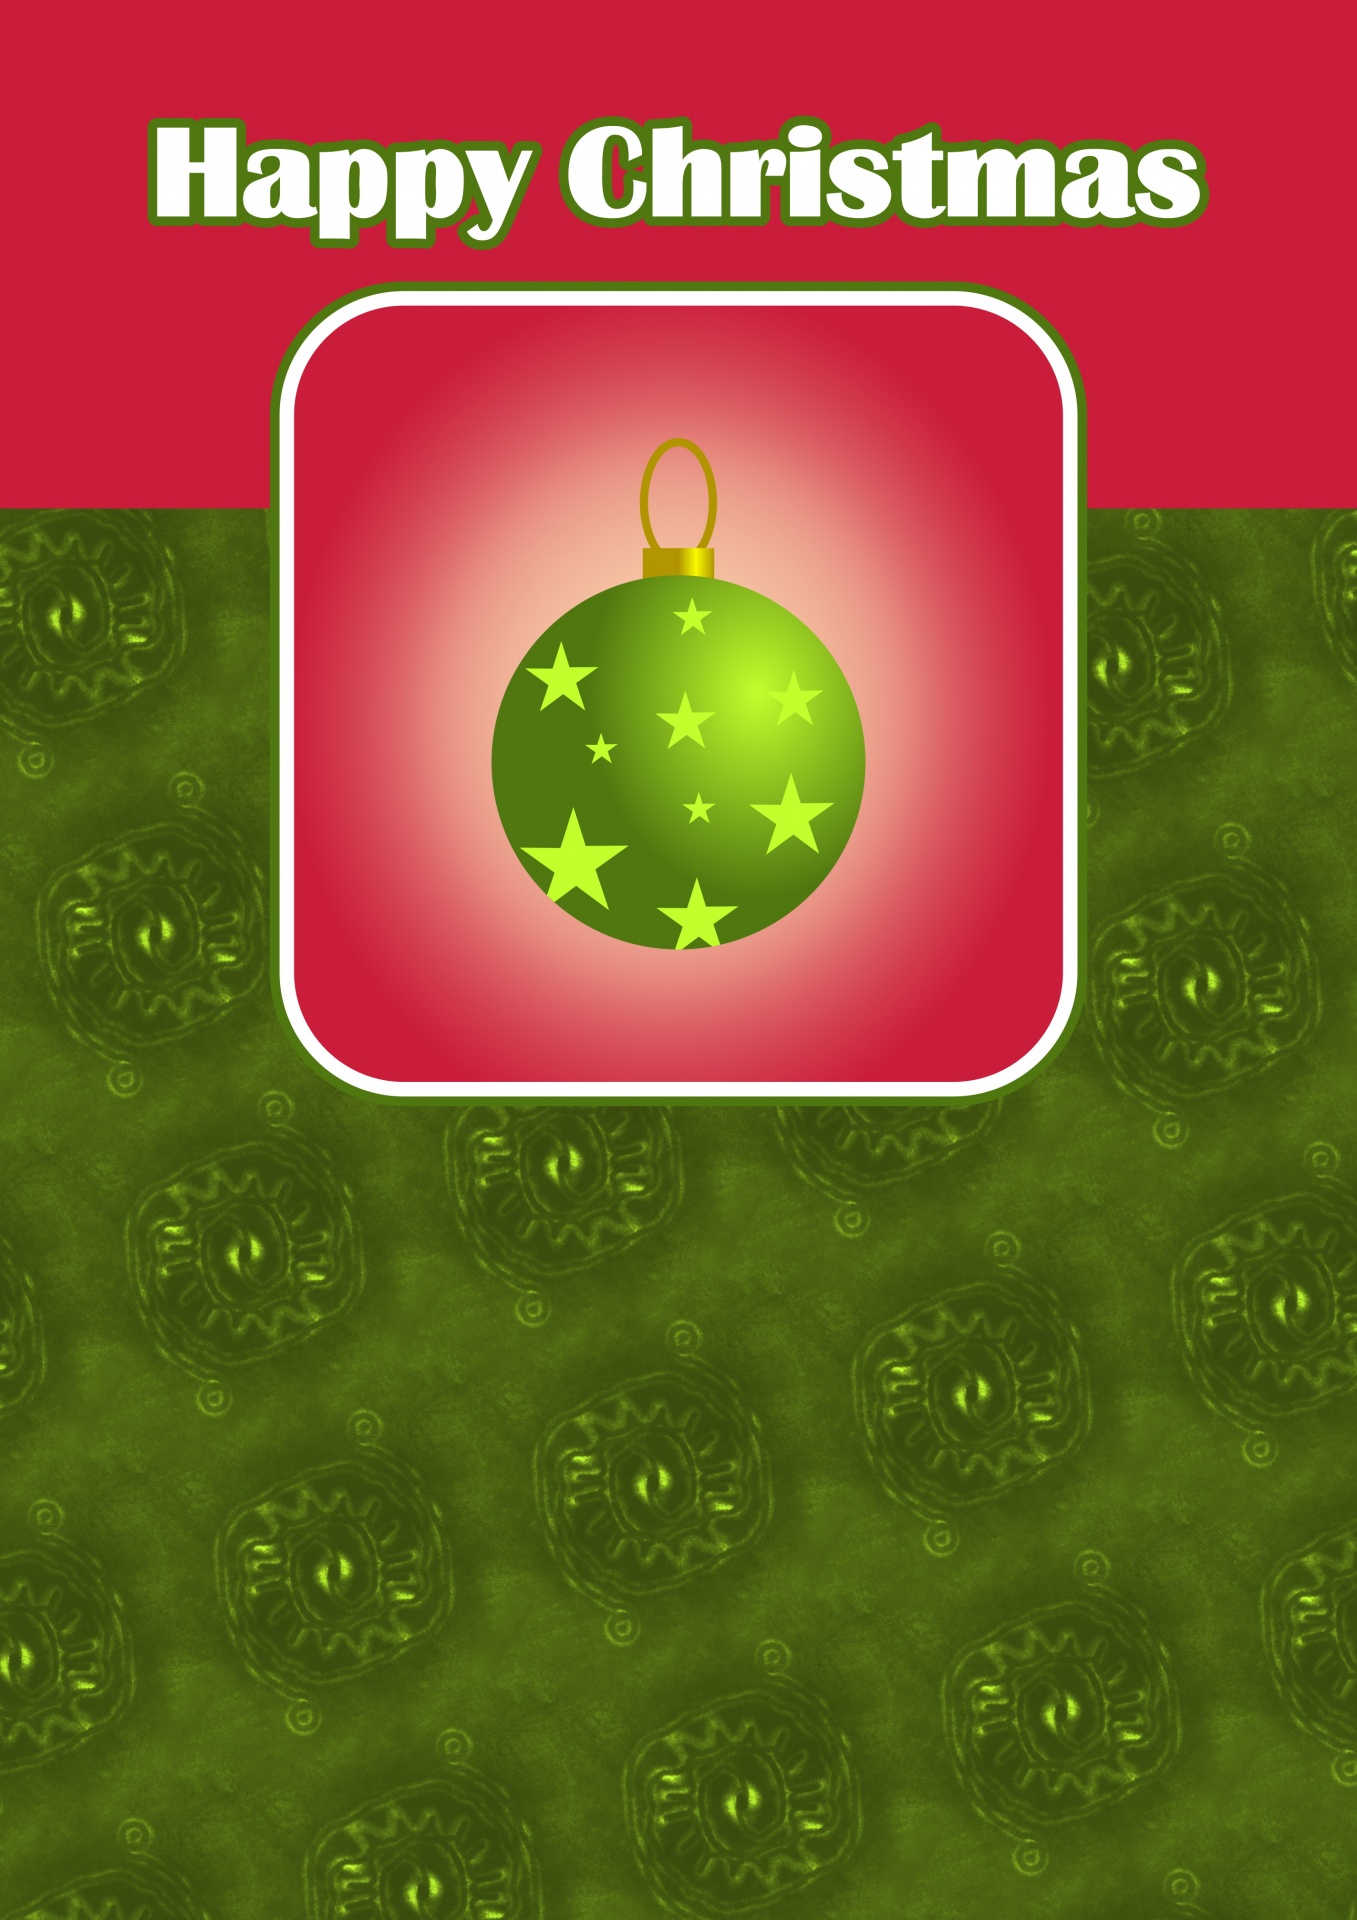 free clip art for christmas cards - photo #27